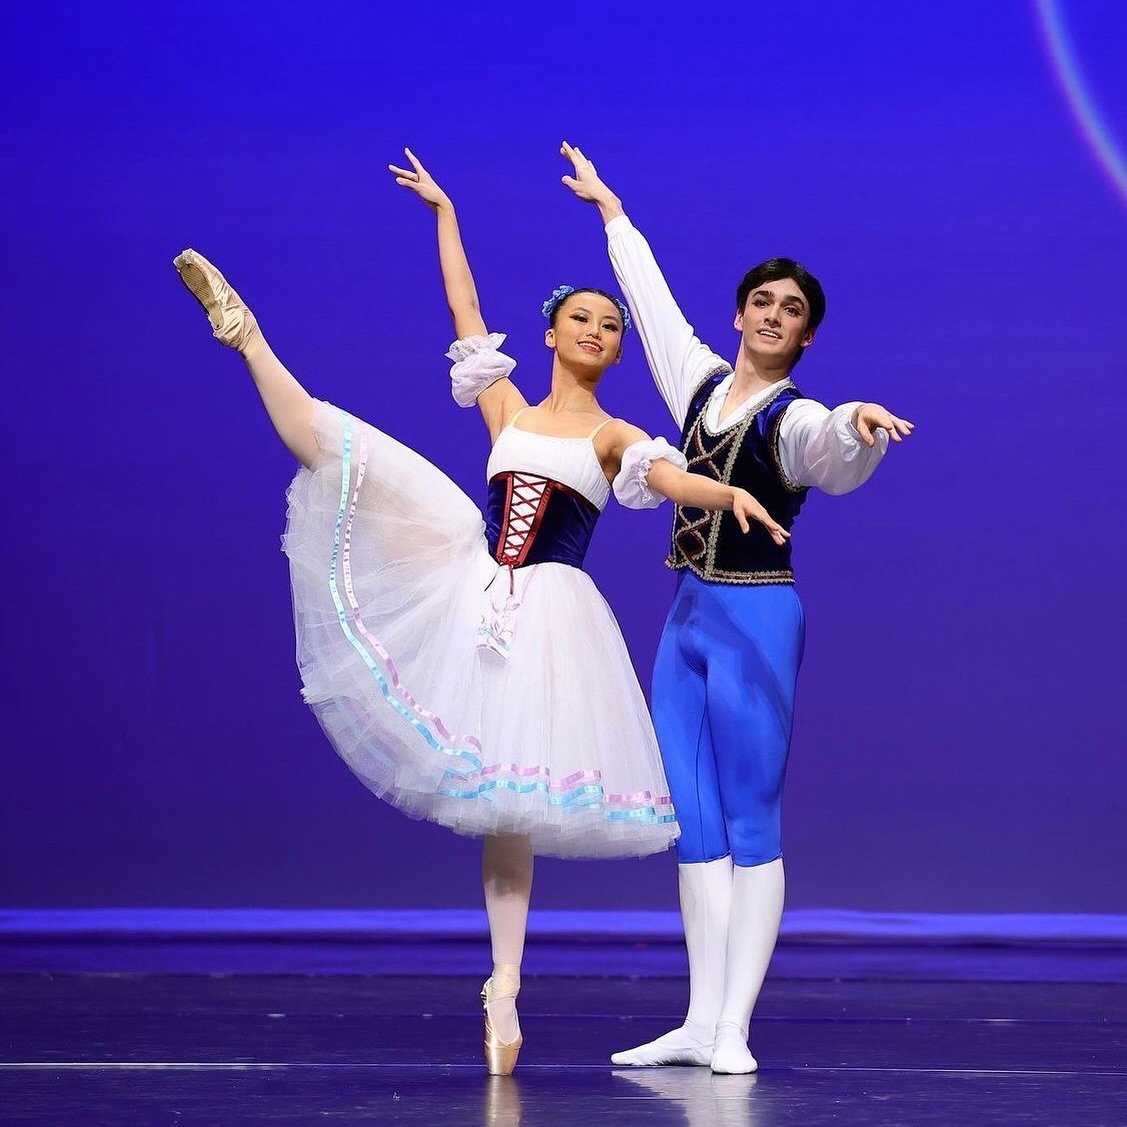 So exciting! @emeraldballetacademy dancers Chloe and Jack are headed to the @yagp Finals in New York this week. This is the second time that this lovely pair has advanced in the Pas de Deux category. Congratulations!